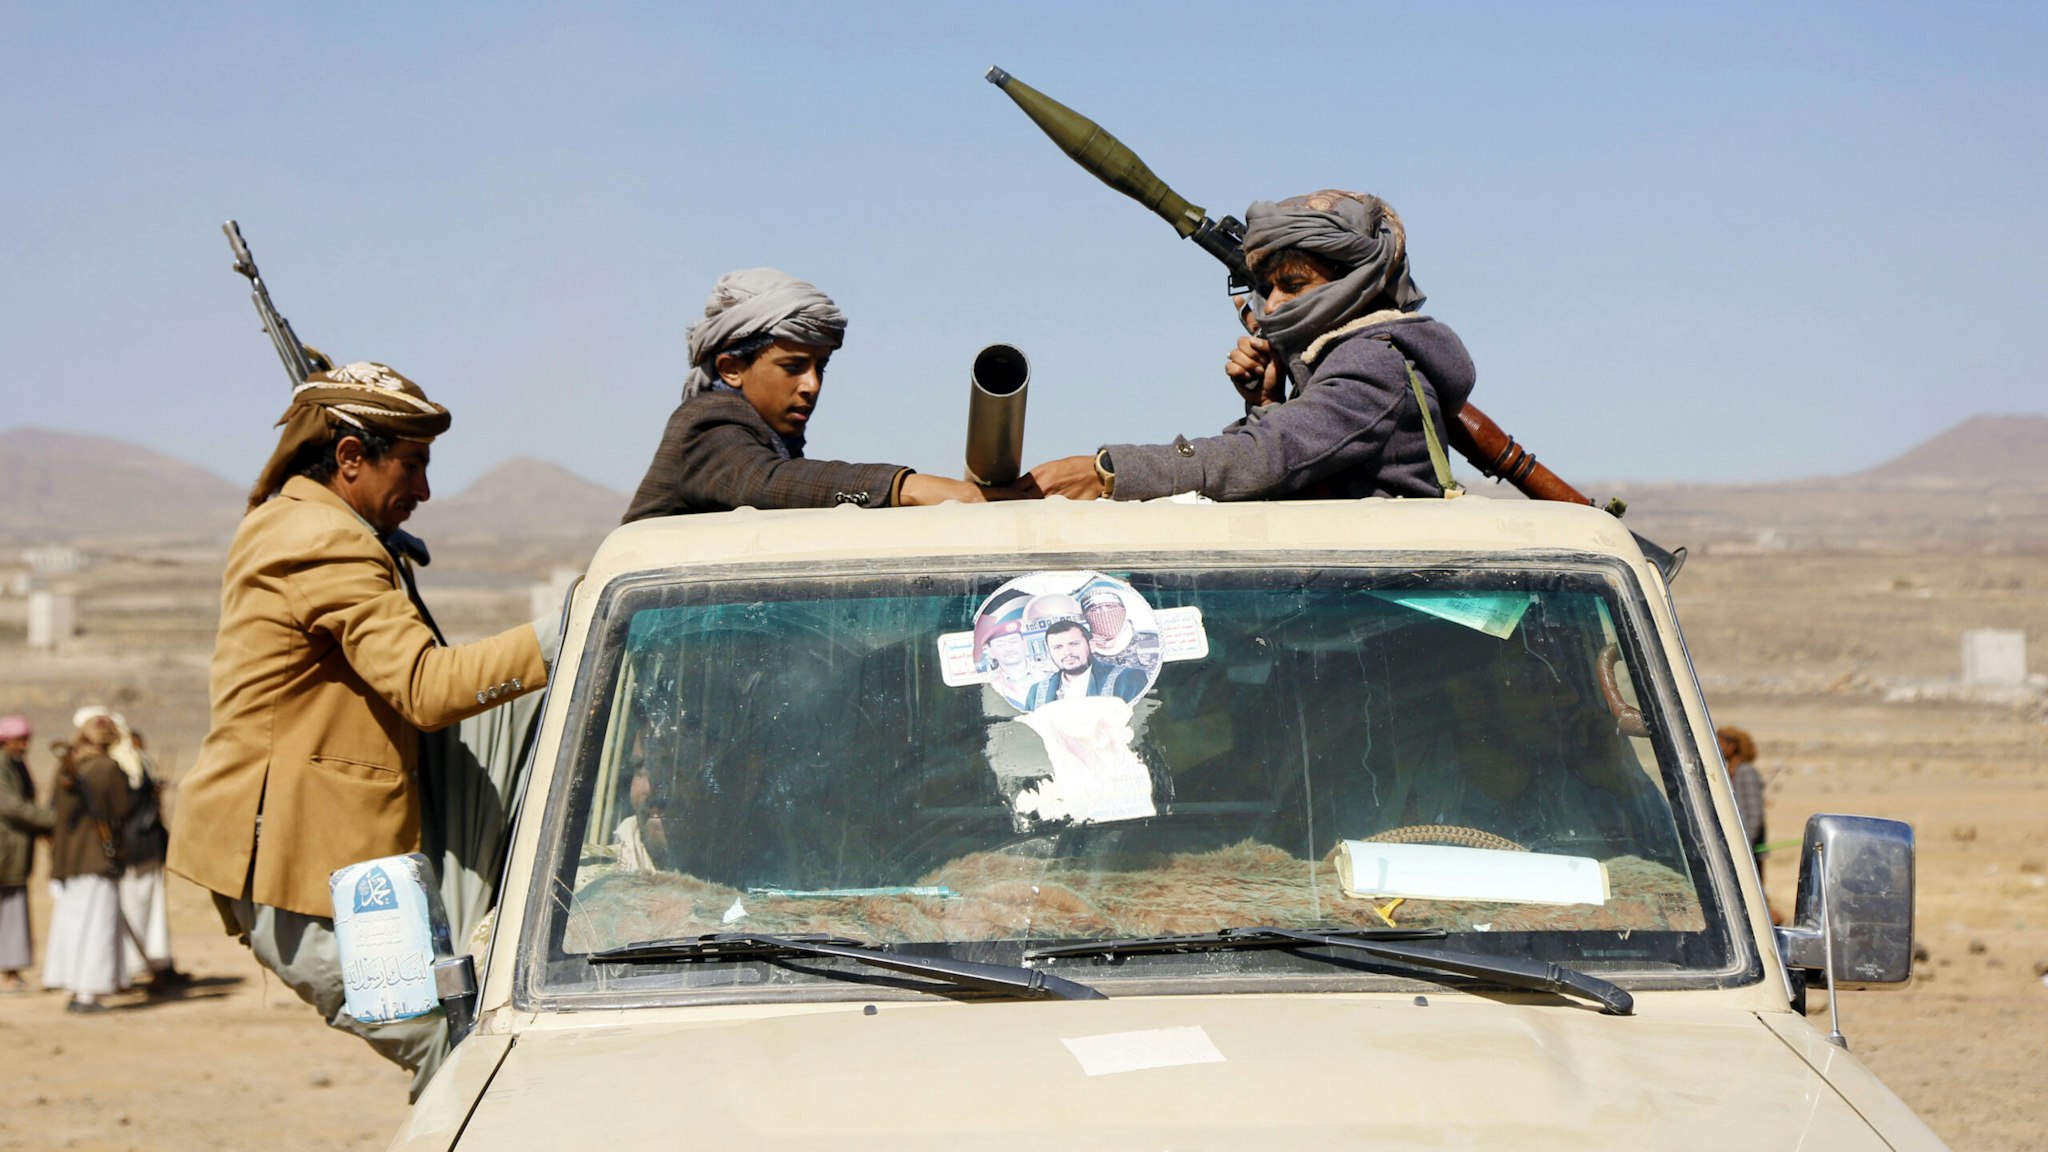 SANA'A, YEMEN - JANUARY 14: Houthi followers ride a vehicle with a machine gun during a tribal gathering on January 14, 2024 on the outskirts of Sana'a, Yemen. Houthi followers gathered to protest against the U.S.-U.K. airstrikes on positions in areas under their control.